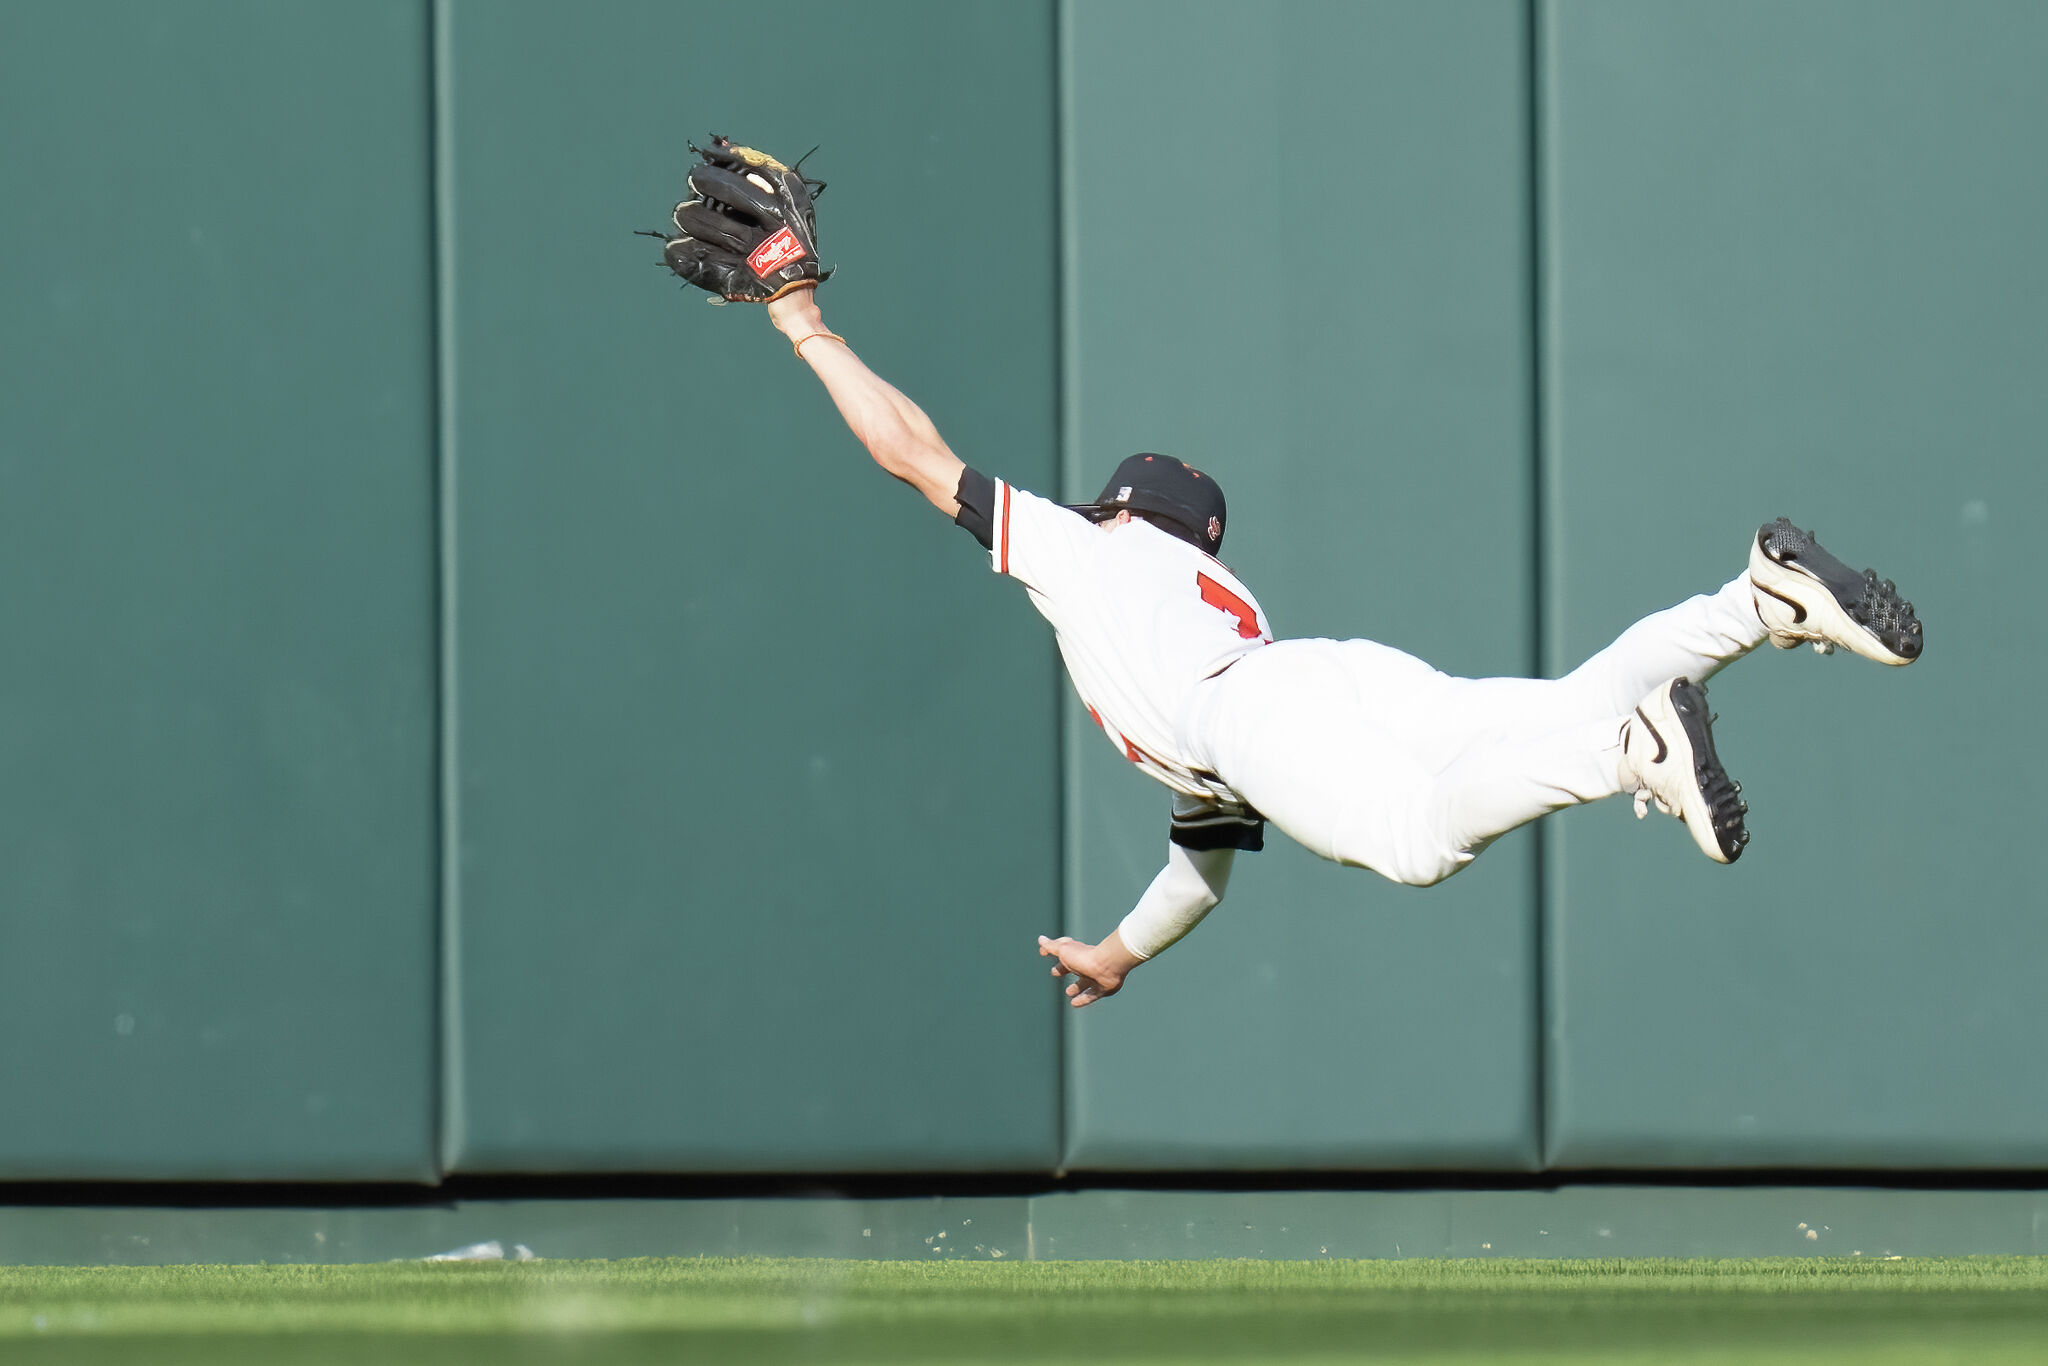 Jim Edmonds' Incredible Catch, 25 Years Later